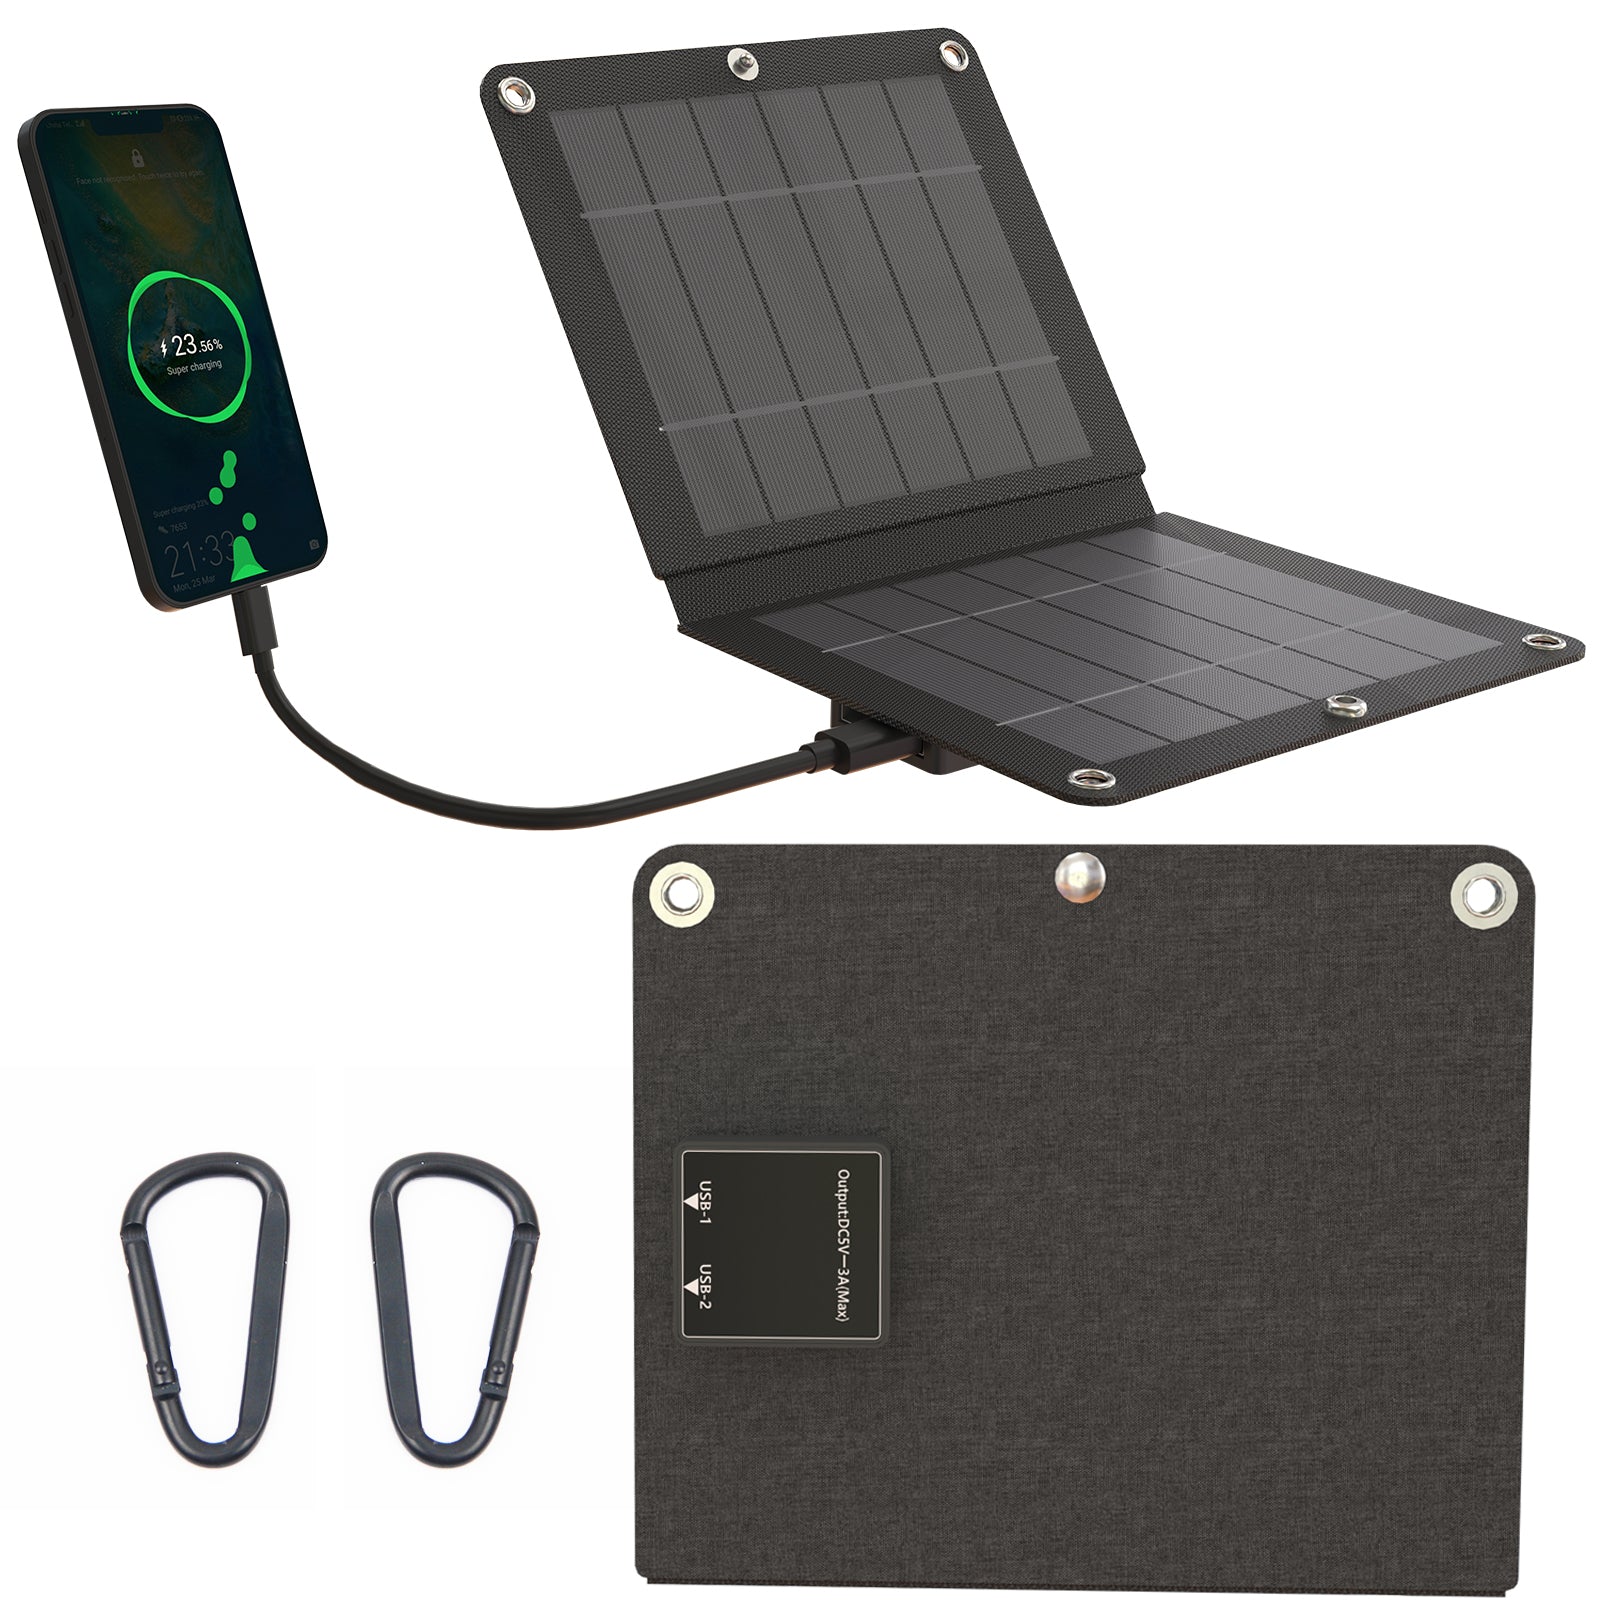 LMENGER 7W Portable Solar Panel, Foldable Solar Charger, IP65 Waterproof, Compatible with iPhone, iPad, Samsung Galaxy for Outdoor Activities